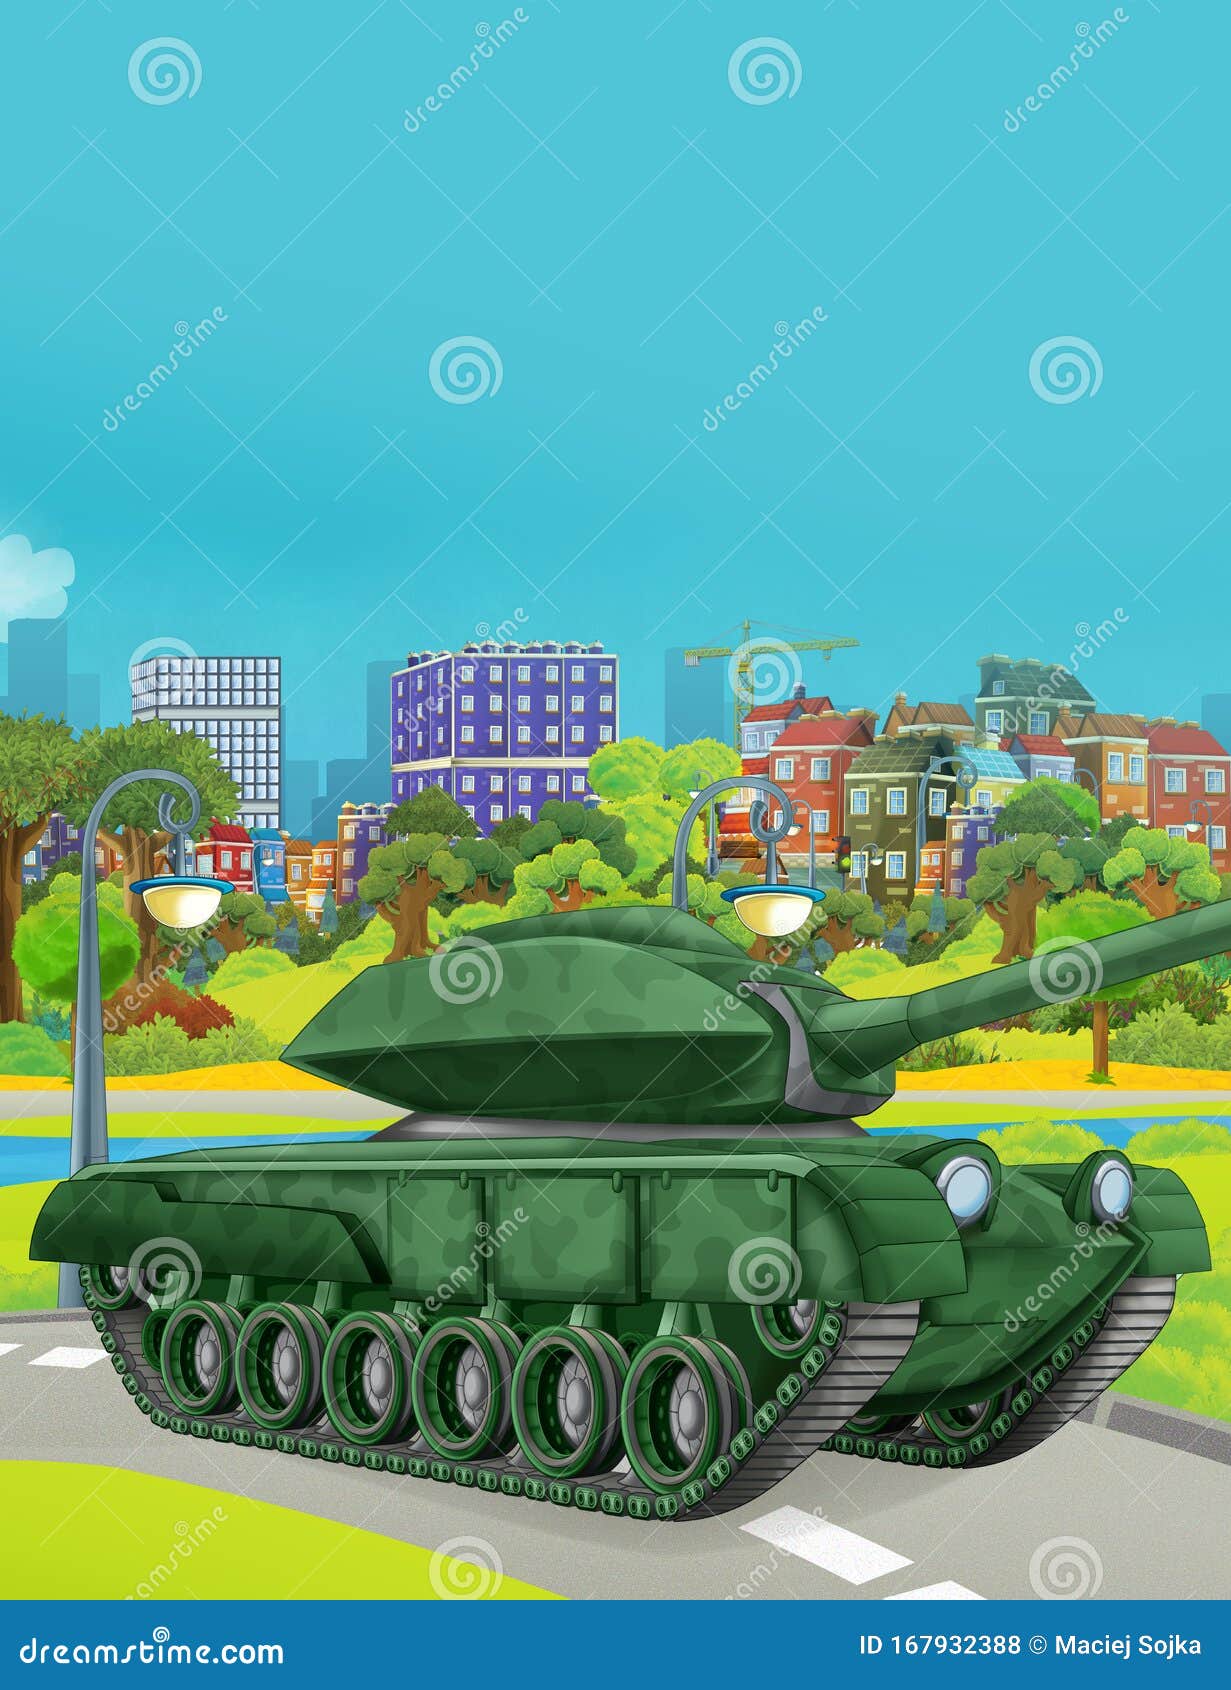 Cartoon Scene with Military Army Car Vehicle Tank on the Road -  Illustration Stock Illustration - Illustration of plane, driving: 167932388